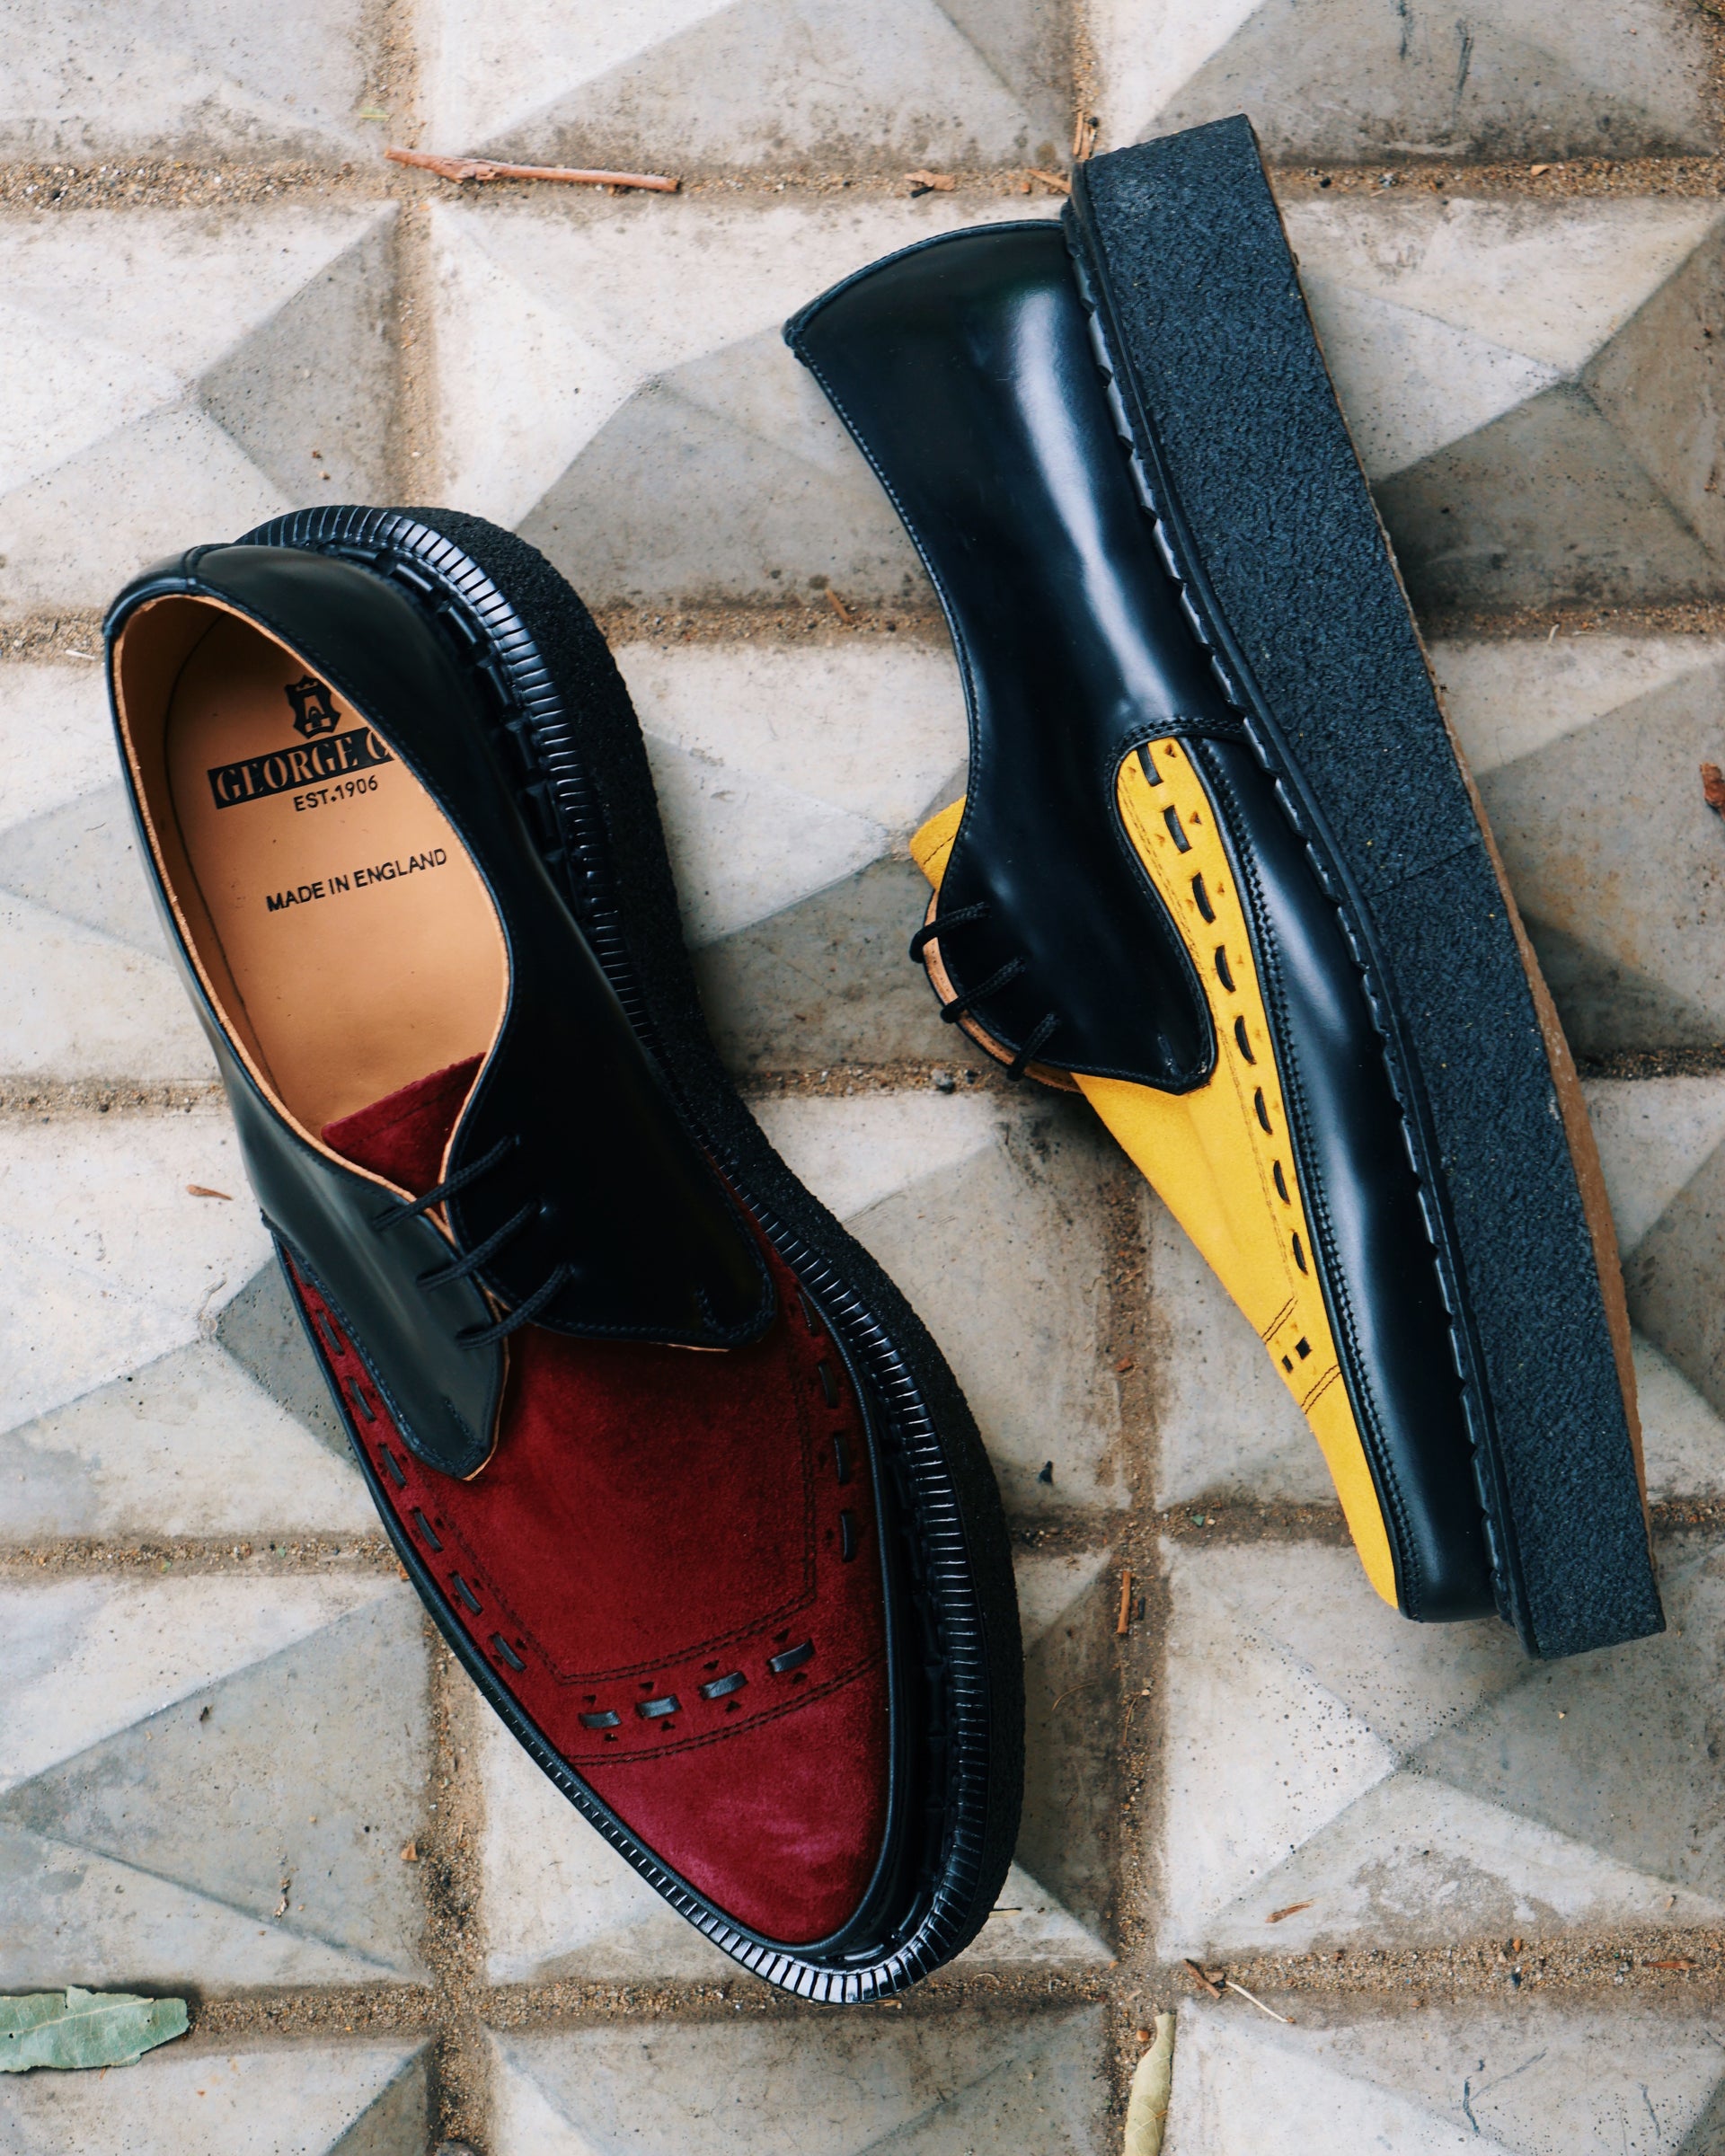 Pointed diano shoes in black with mustard suede and black with burgundy suede